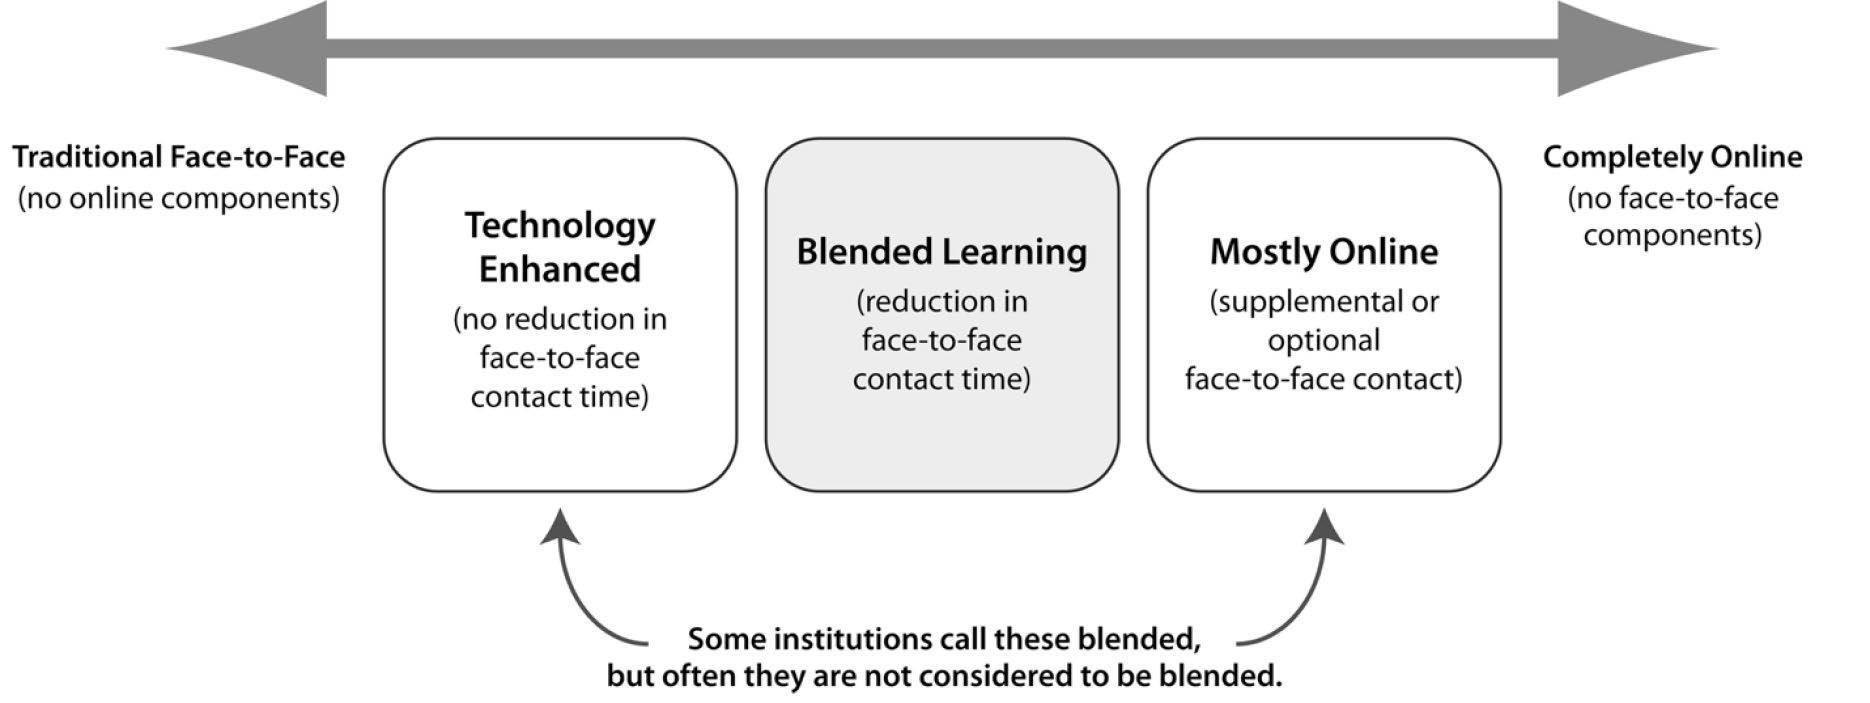 http://openbooks.col.org/blendedlearning/wp-content/uploads/2/2019/04/Guide-to-Blended-Learning_Nov26_updated_Page_39_Image_0001.jpg